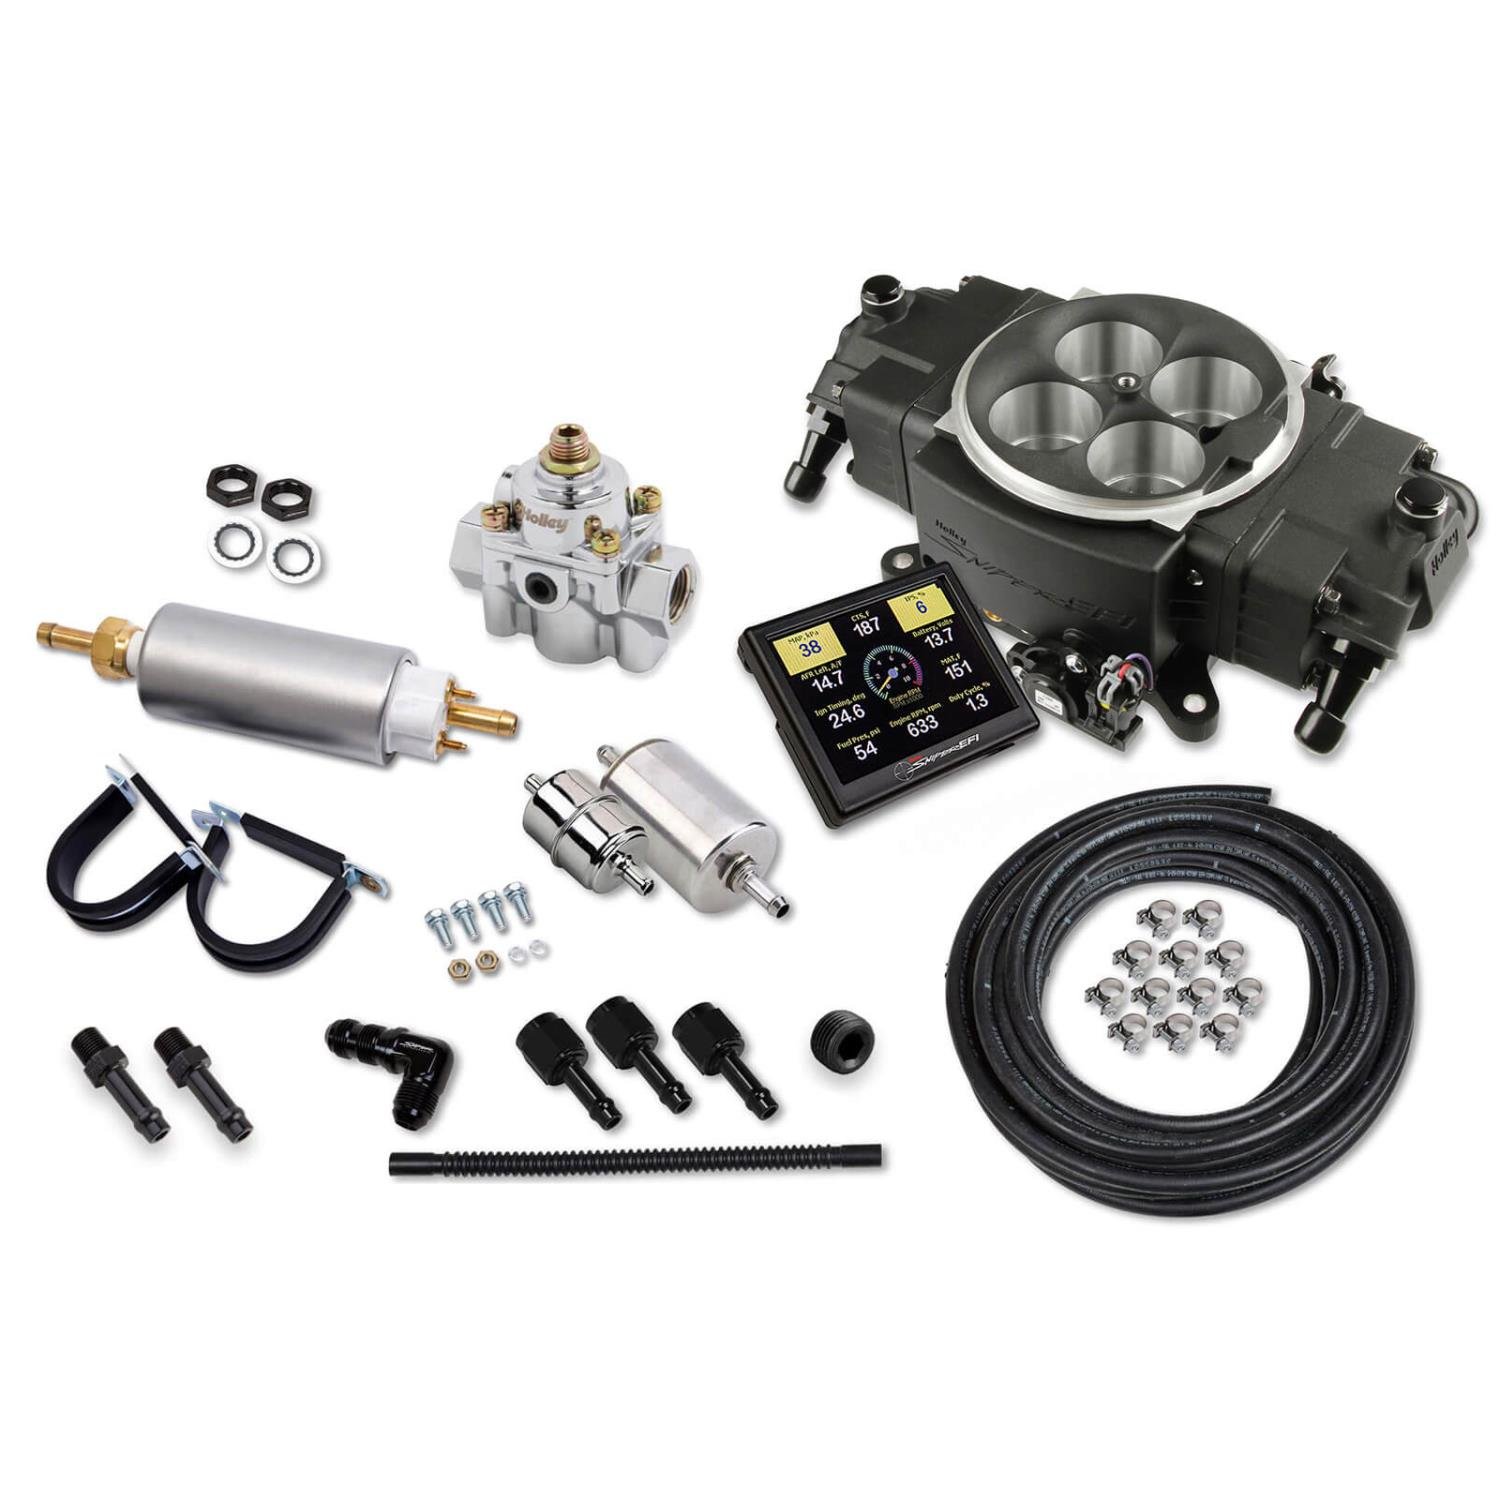 550-871K Sniper Stealth 4150 Self-Tuning Fuel Injection System Master Kit